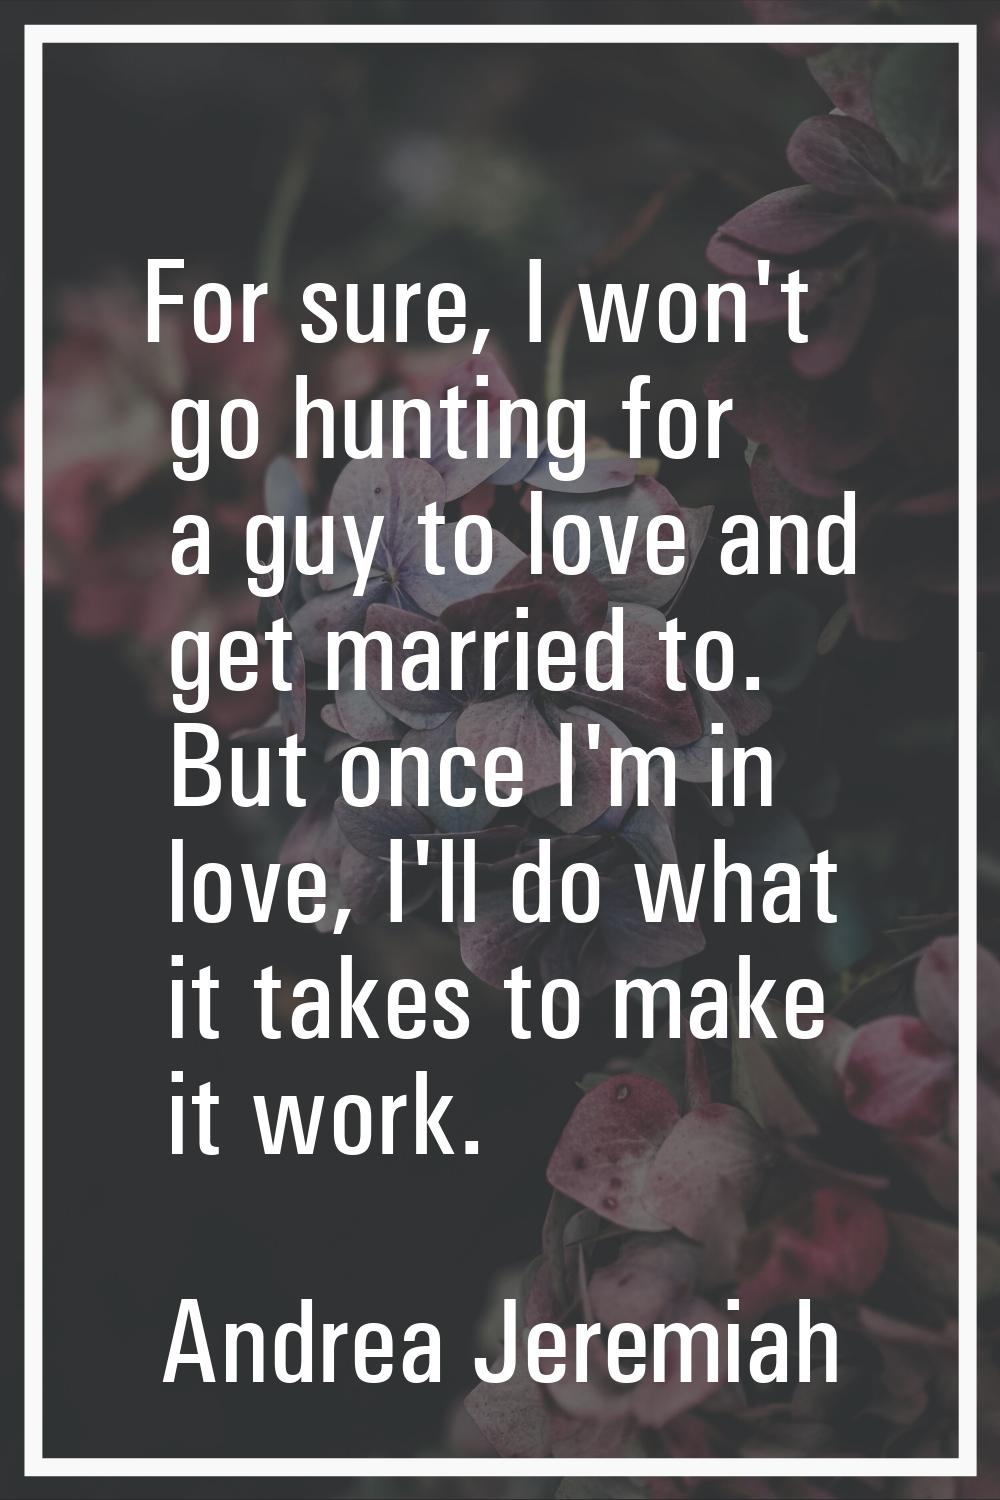 For sure, I won't go hunting for a guy to love and get married to. But once I'm in love, I'll do wh